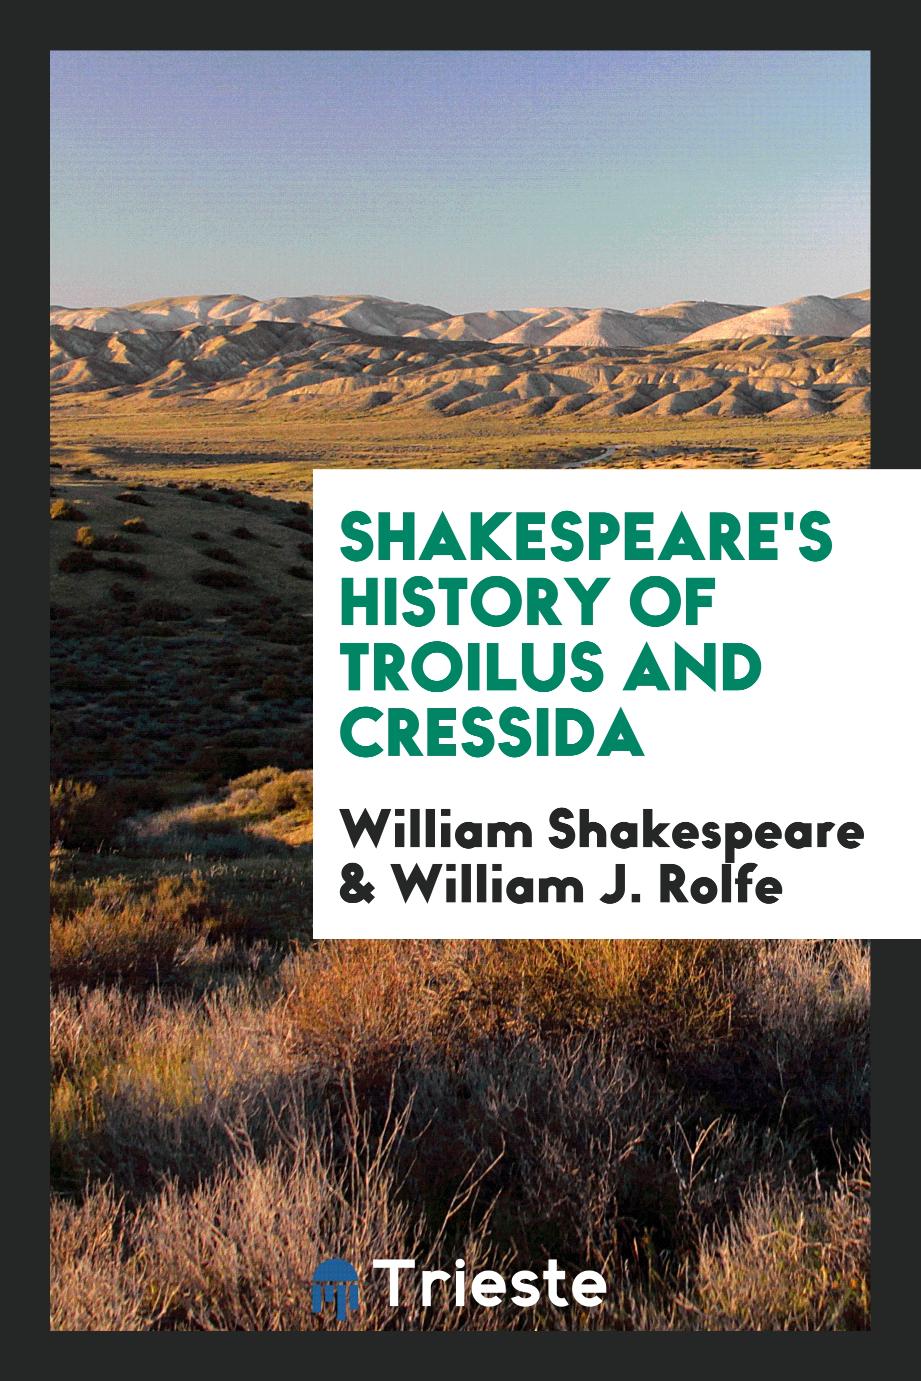 Shakespeare's History of Troilus and Cressida